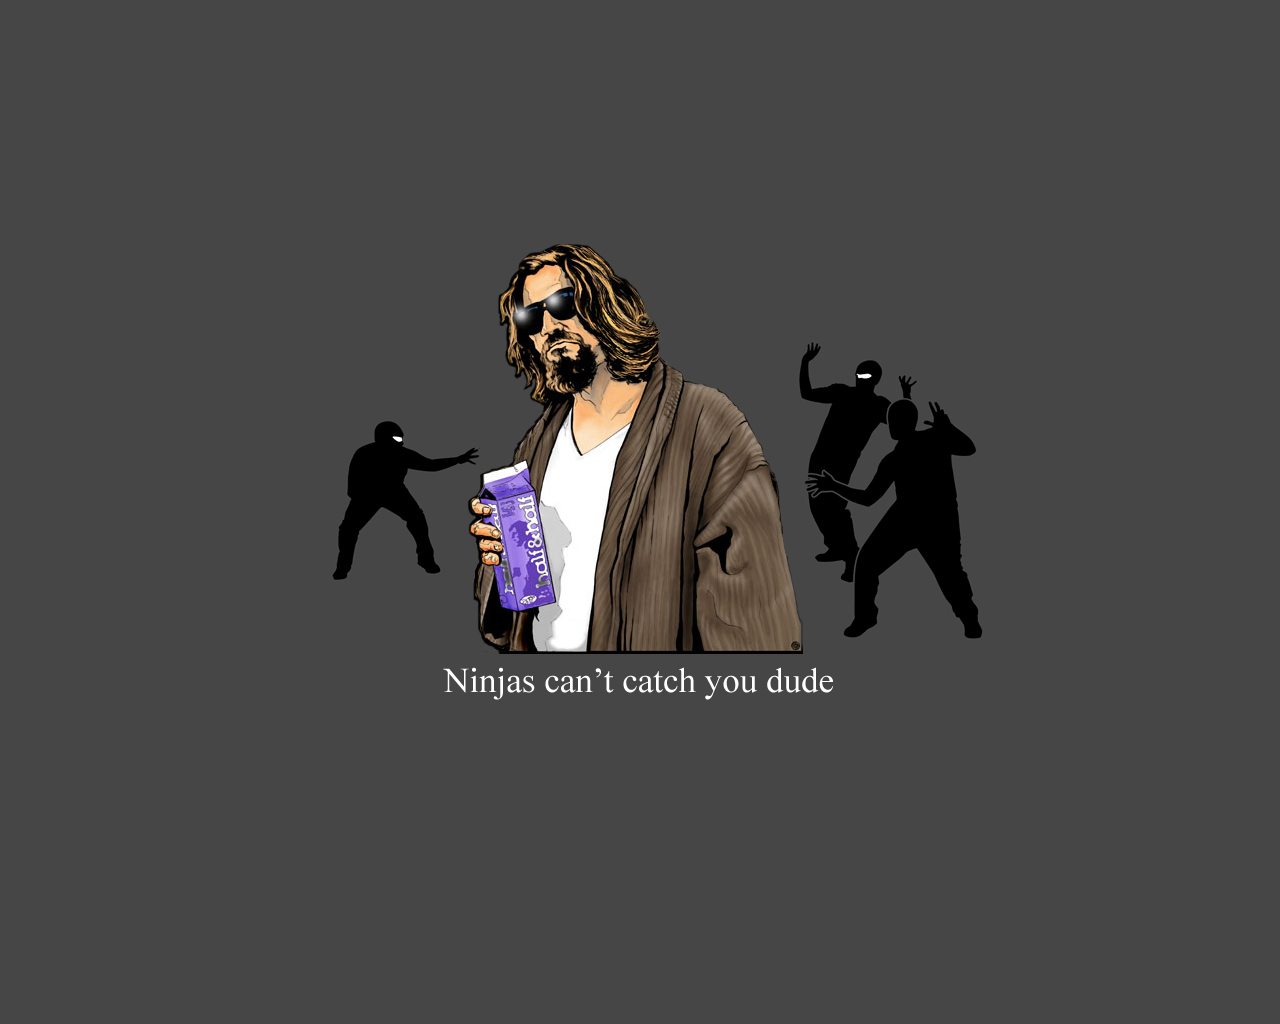 The Dude Minimalism Wallpapers